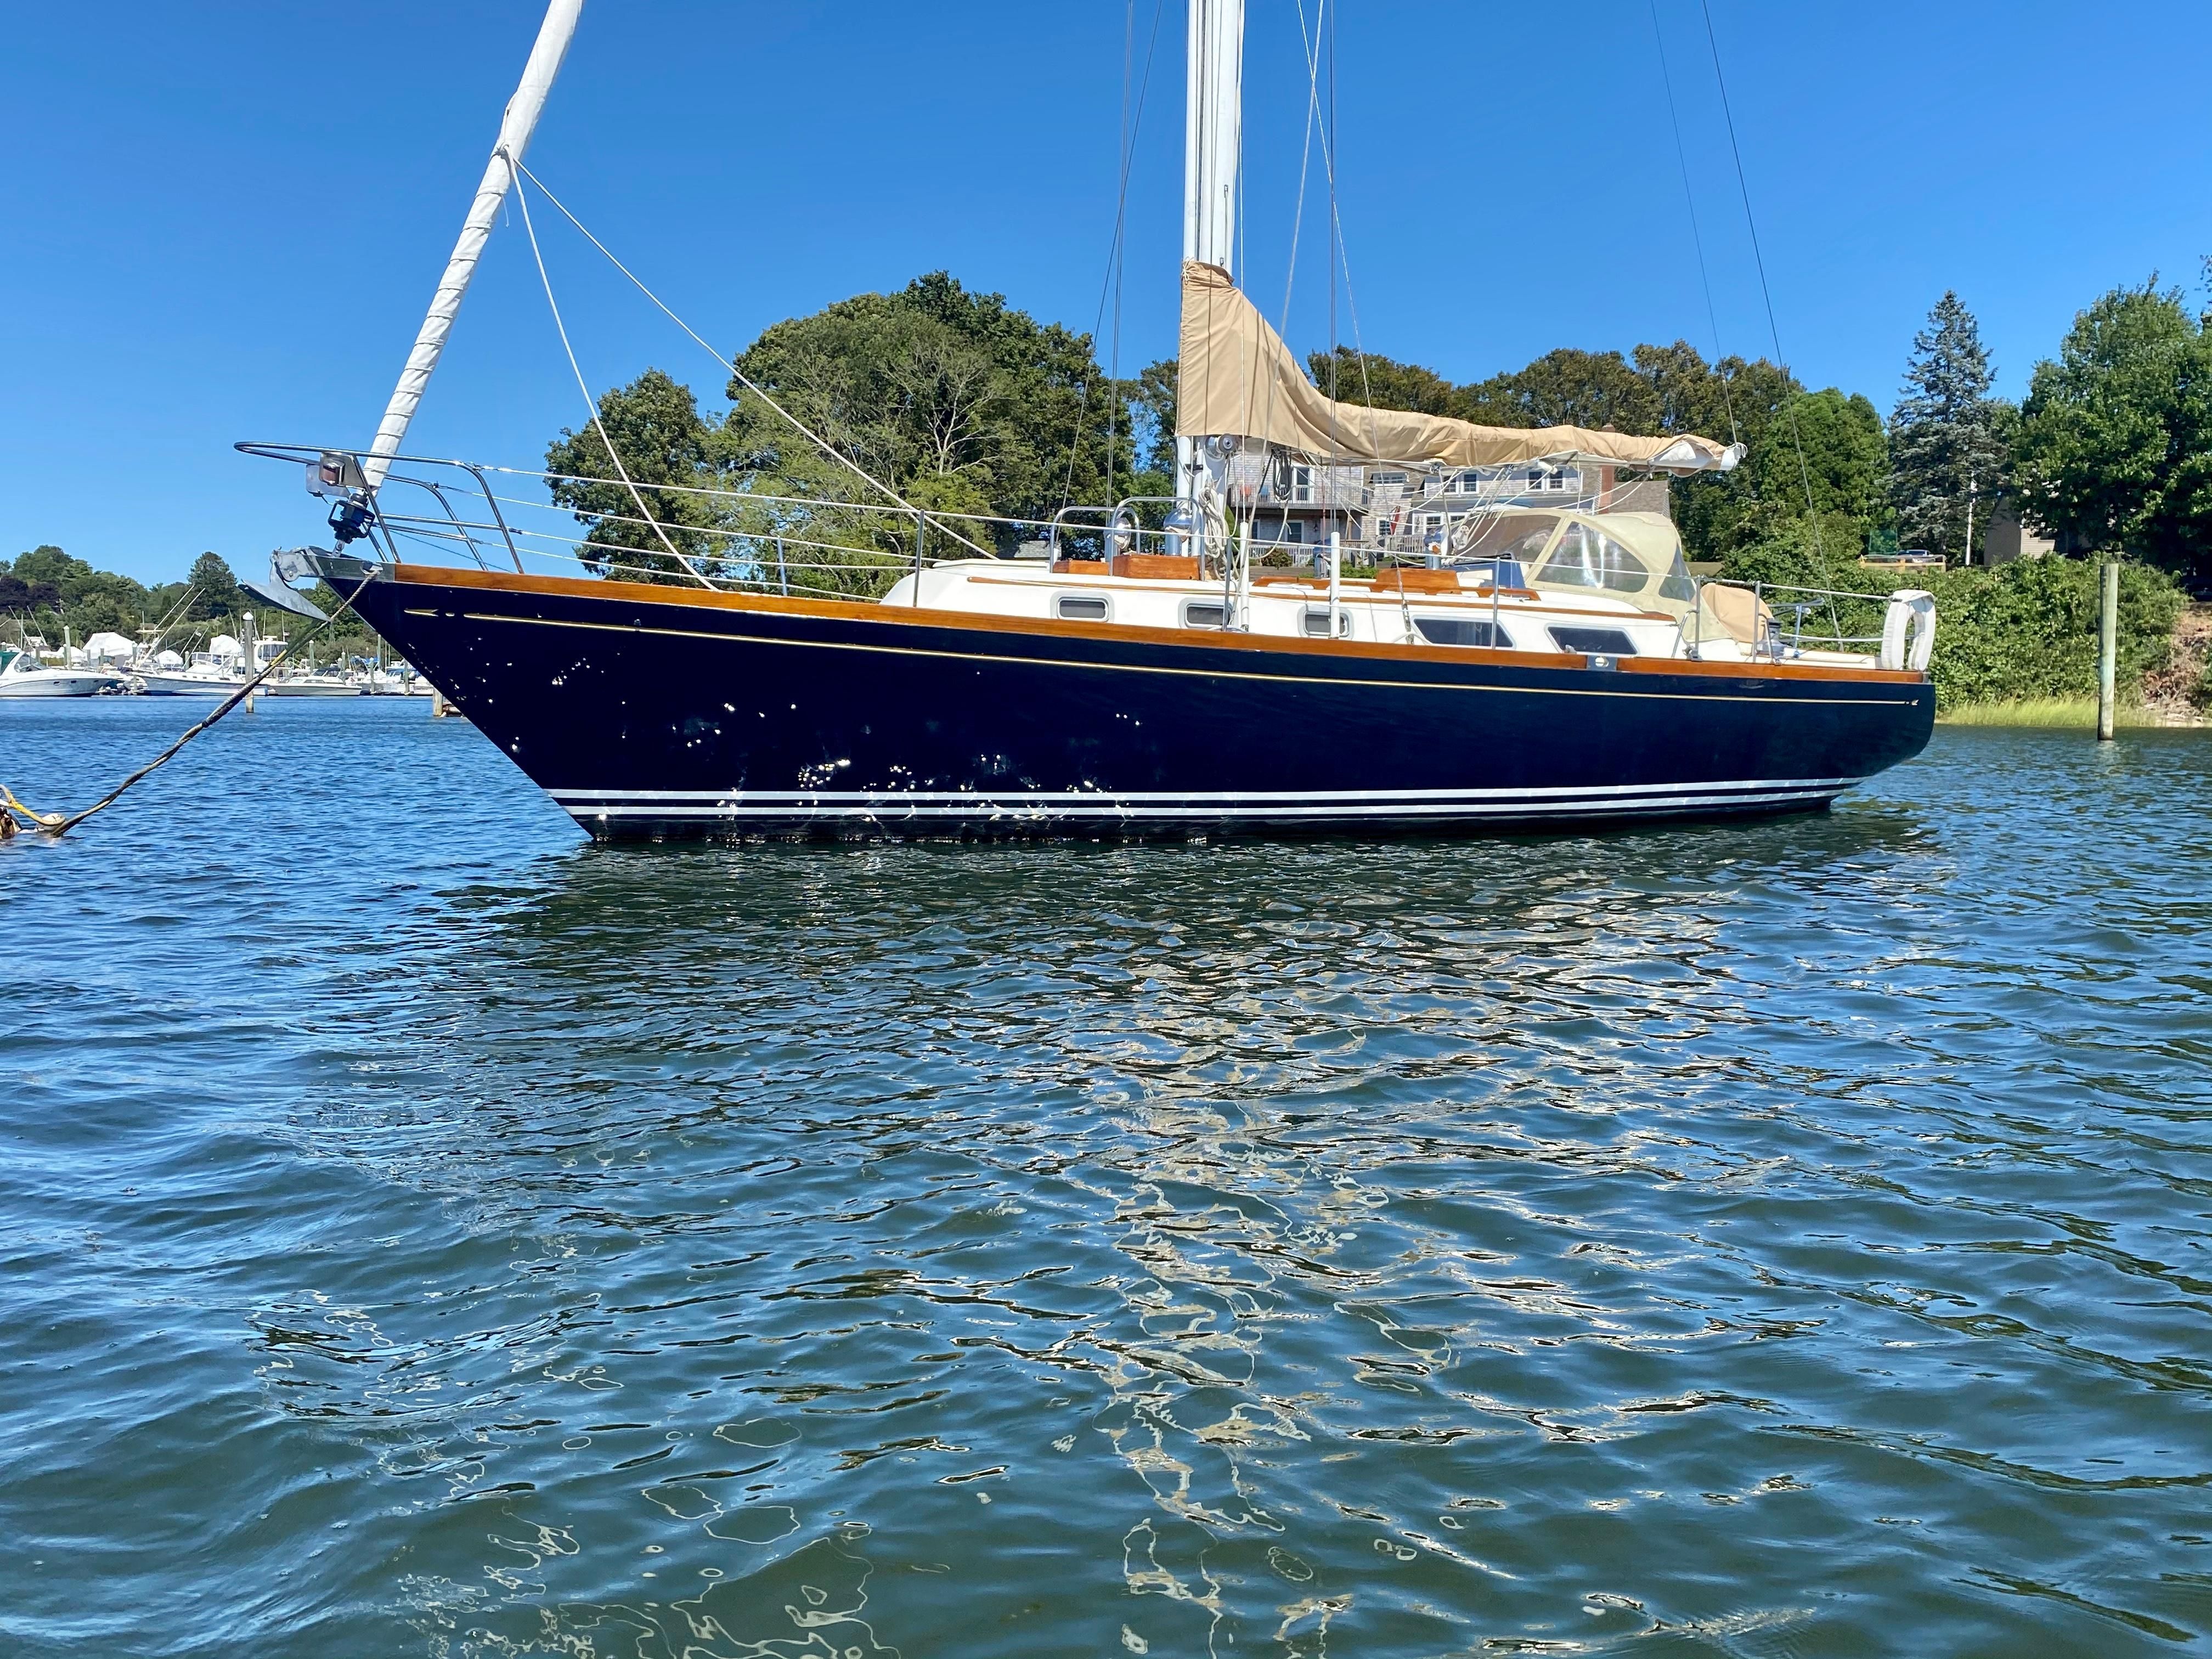 bristol sailboats for sale by owner